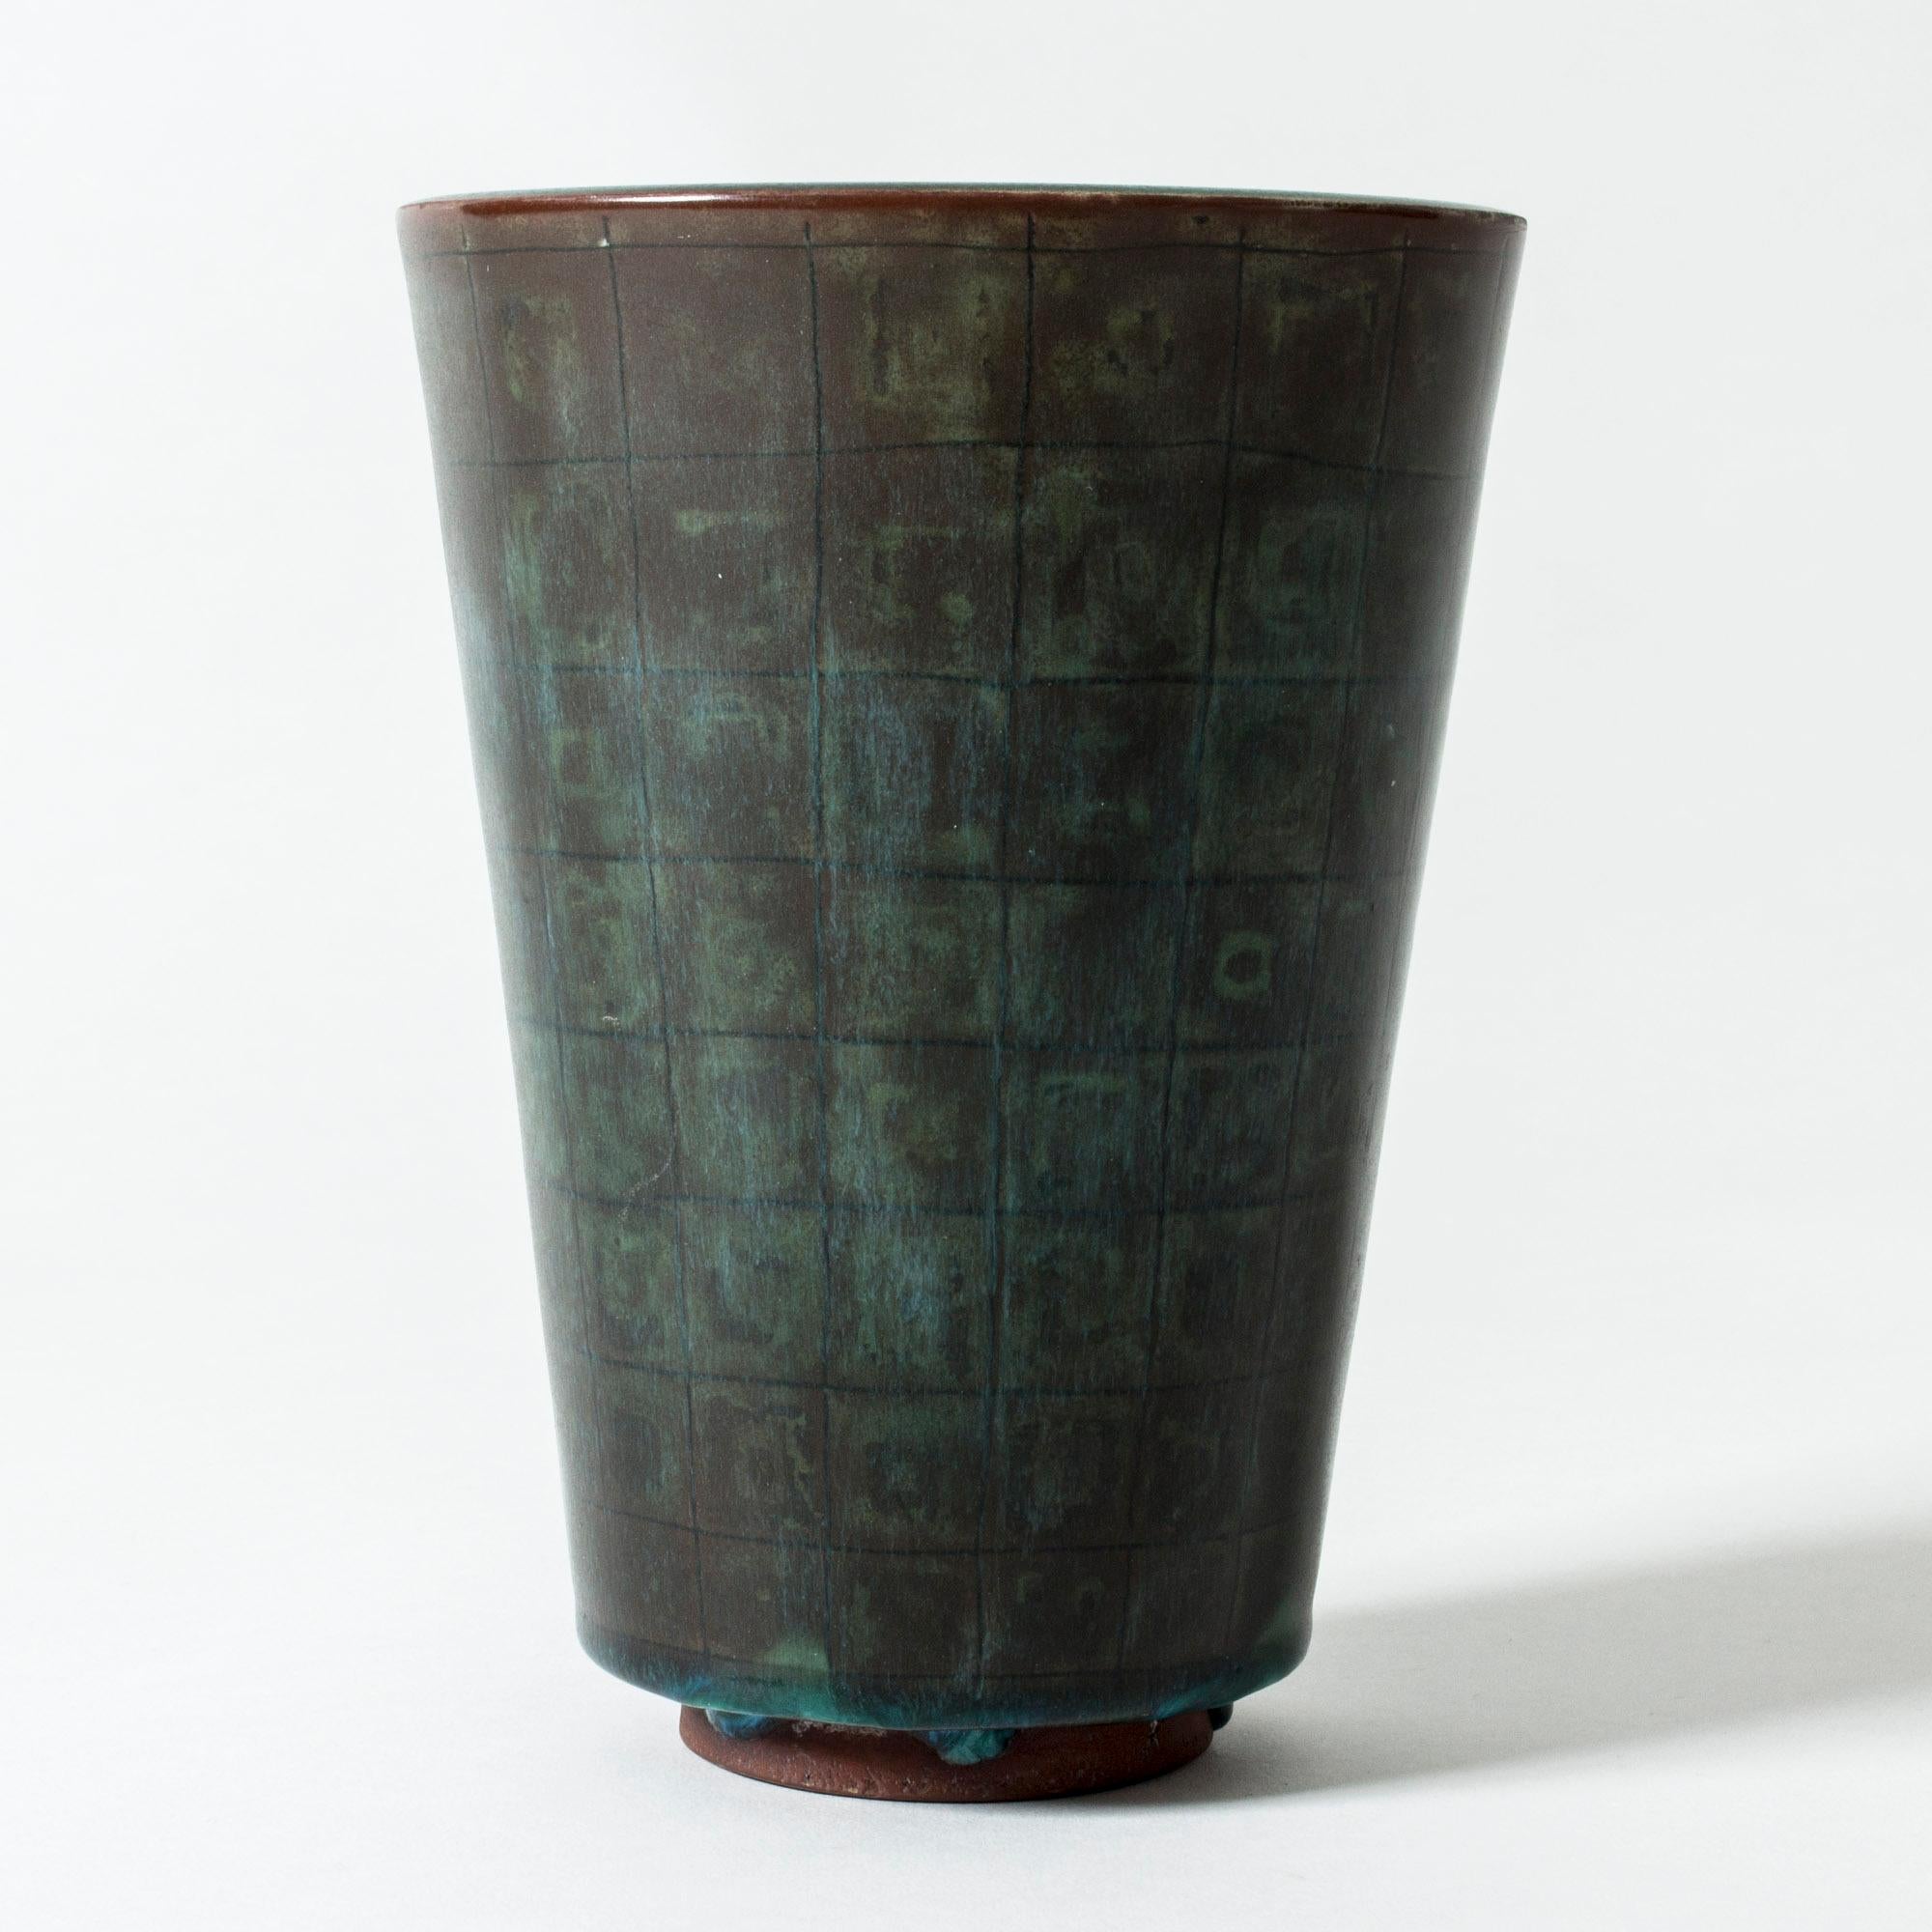 Simple yet striking “Farsta” vase by Wilhelm Kåge with clean lines and a subtle checkered pattern in the dark, patinated copper colored glaze.
“Farsta” stoneware is recognized as being the best and most exclusive that has come out of Swedish arts